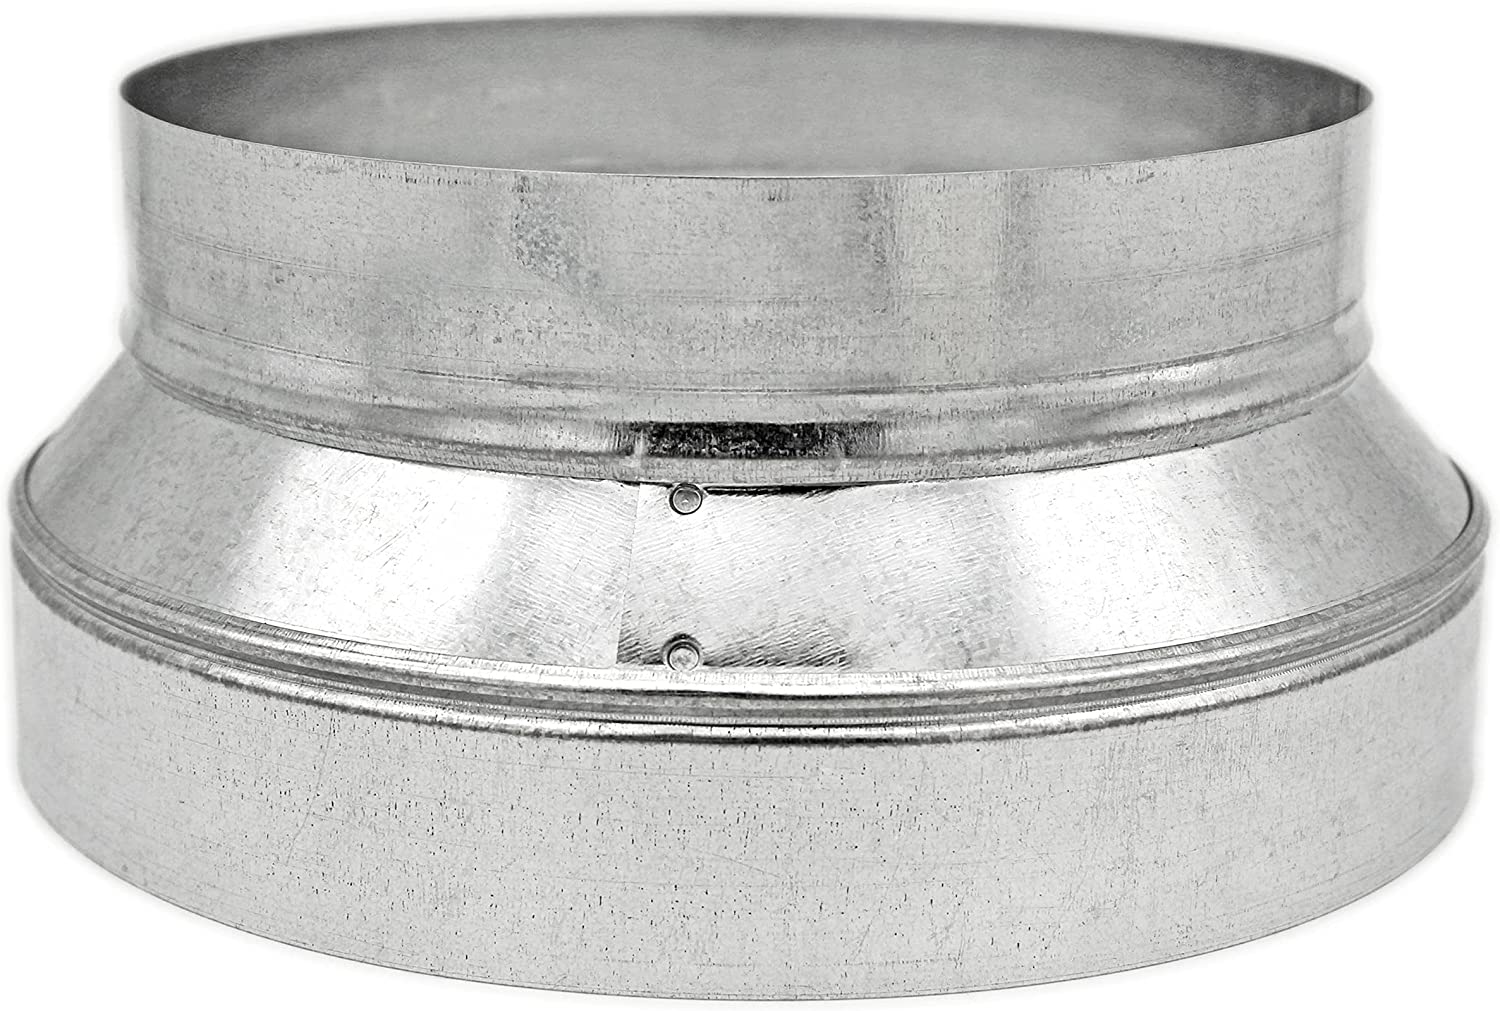 HVAC Premium Round Metal Pipe Reducer & Increaser | 10" to 8" HVAC Duct Reducer or Increaser 30g Gauge | Galvanized Sheet Metal Ducting Connector is Compatible with Duct 8"